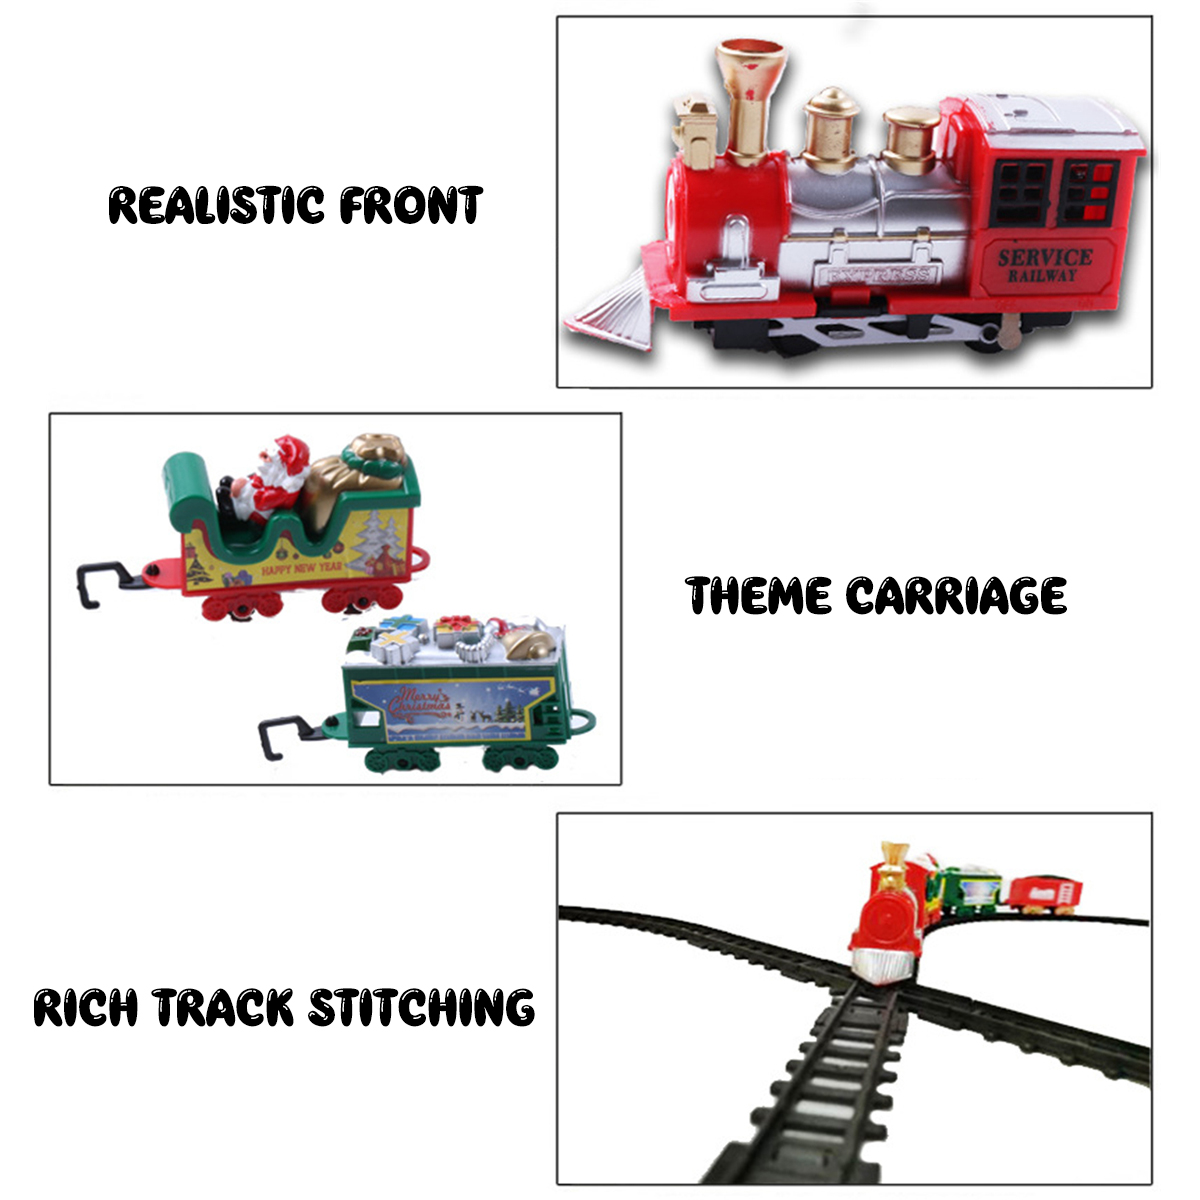 Mini-Electric-ABS-DIY-Assembly-Realistic-Front-Rail-Train-Track-Play-Fun-Model-Toy-for-Kids-Christma-1766568-4